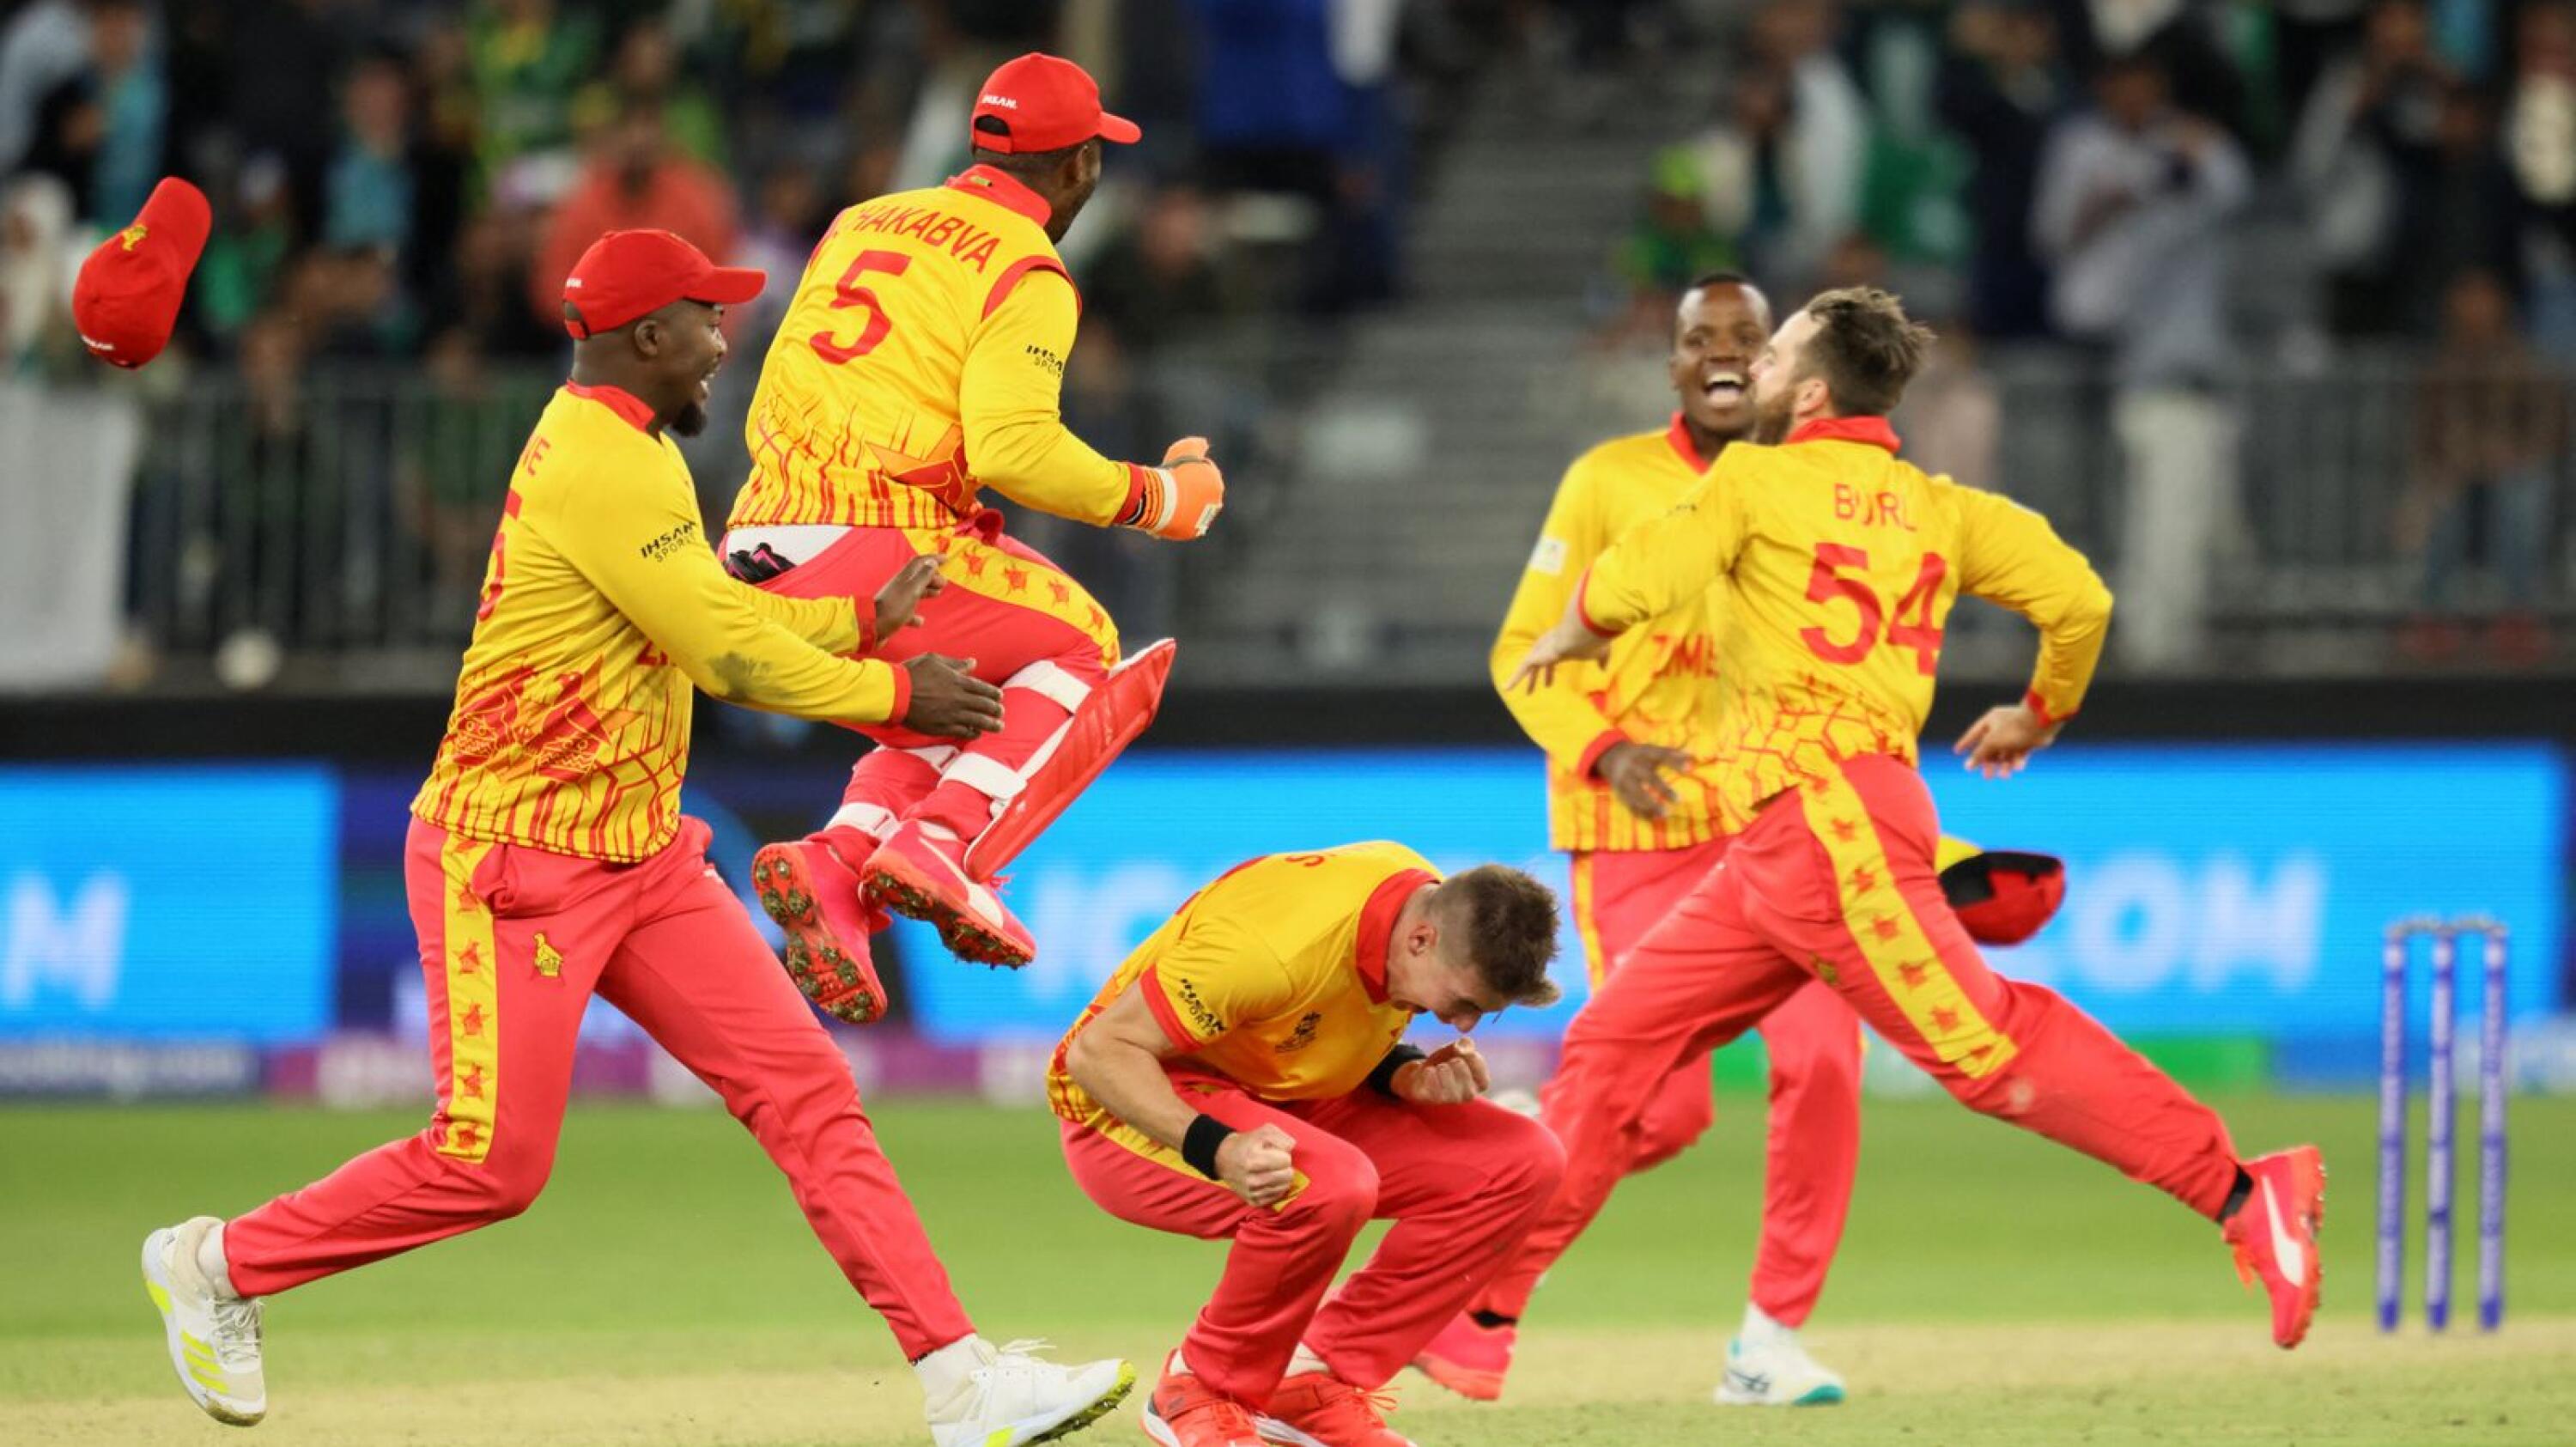 Zimbabwe's players celebrate their victory at the end of their ICC men’s T20 World Cup match against Pakistan in Perth on Thursday